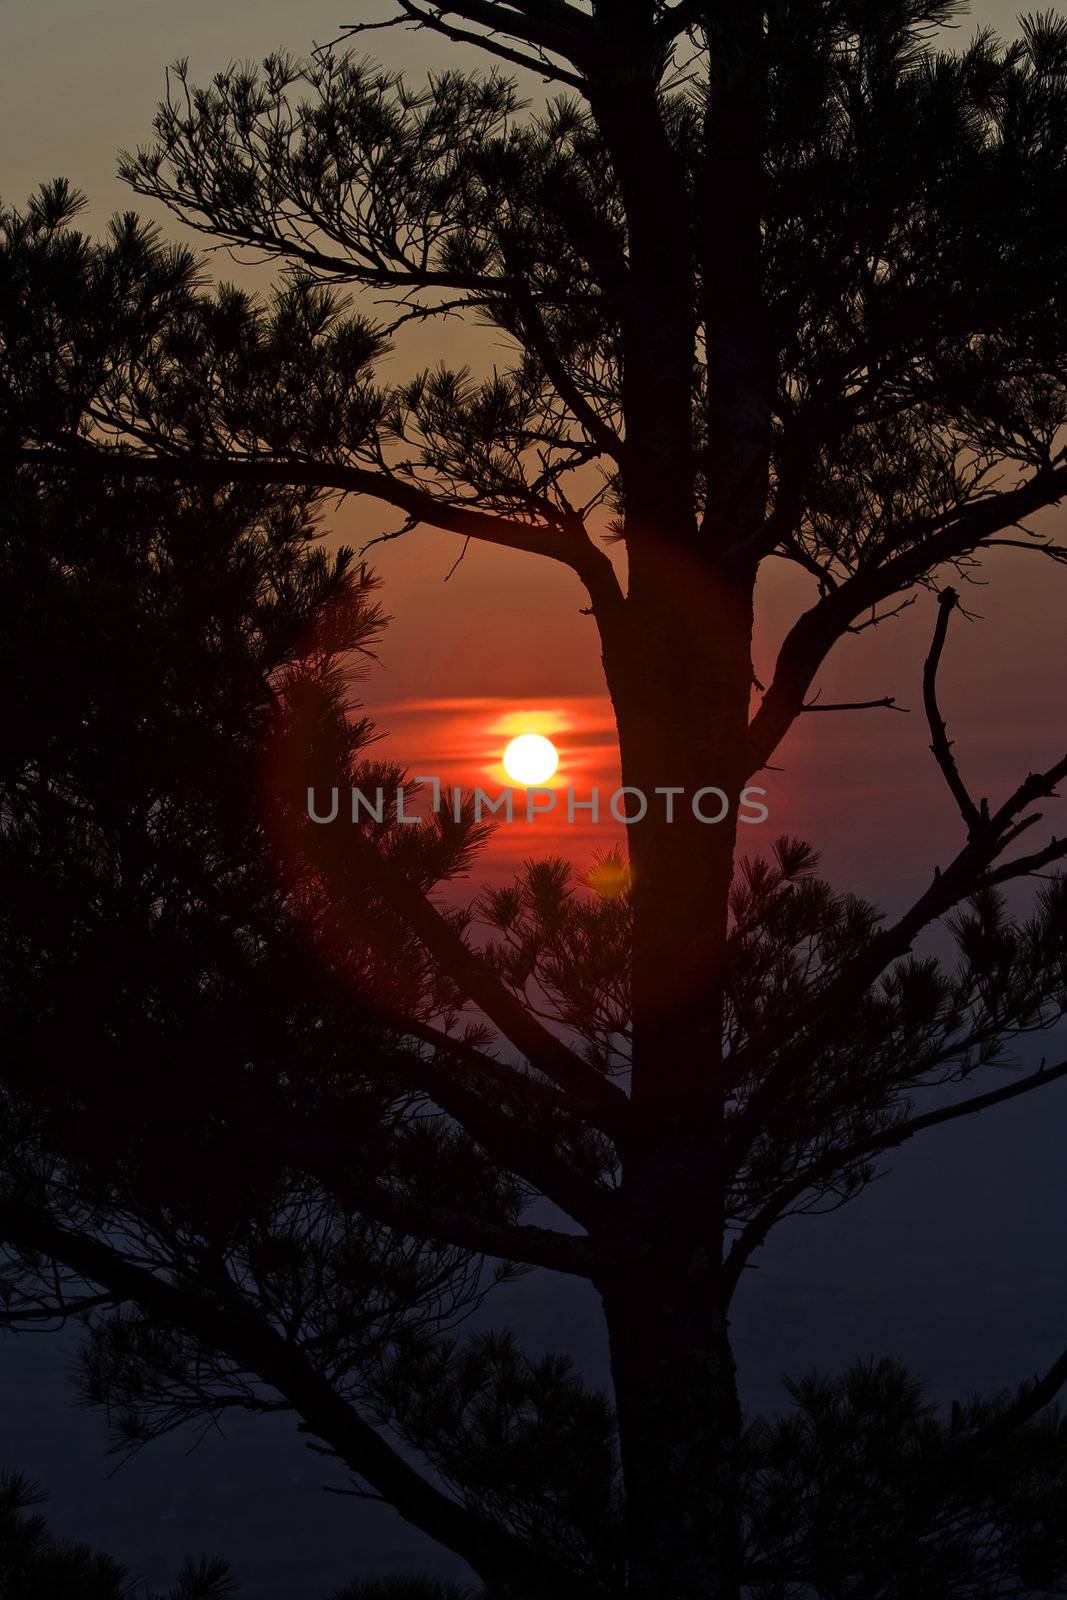 A beautiful red with yellow sunset behind a pine tree showing its Silhouette